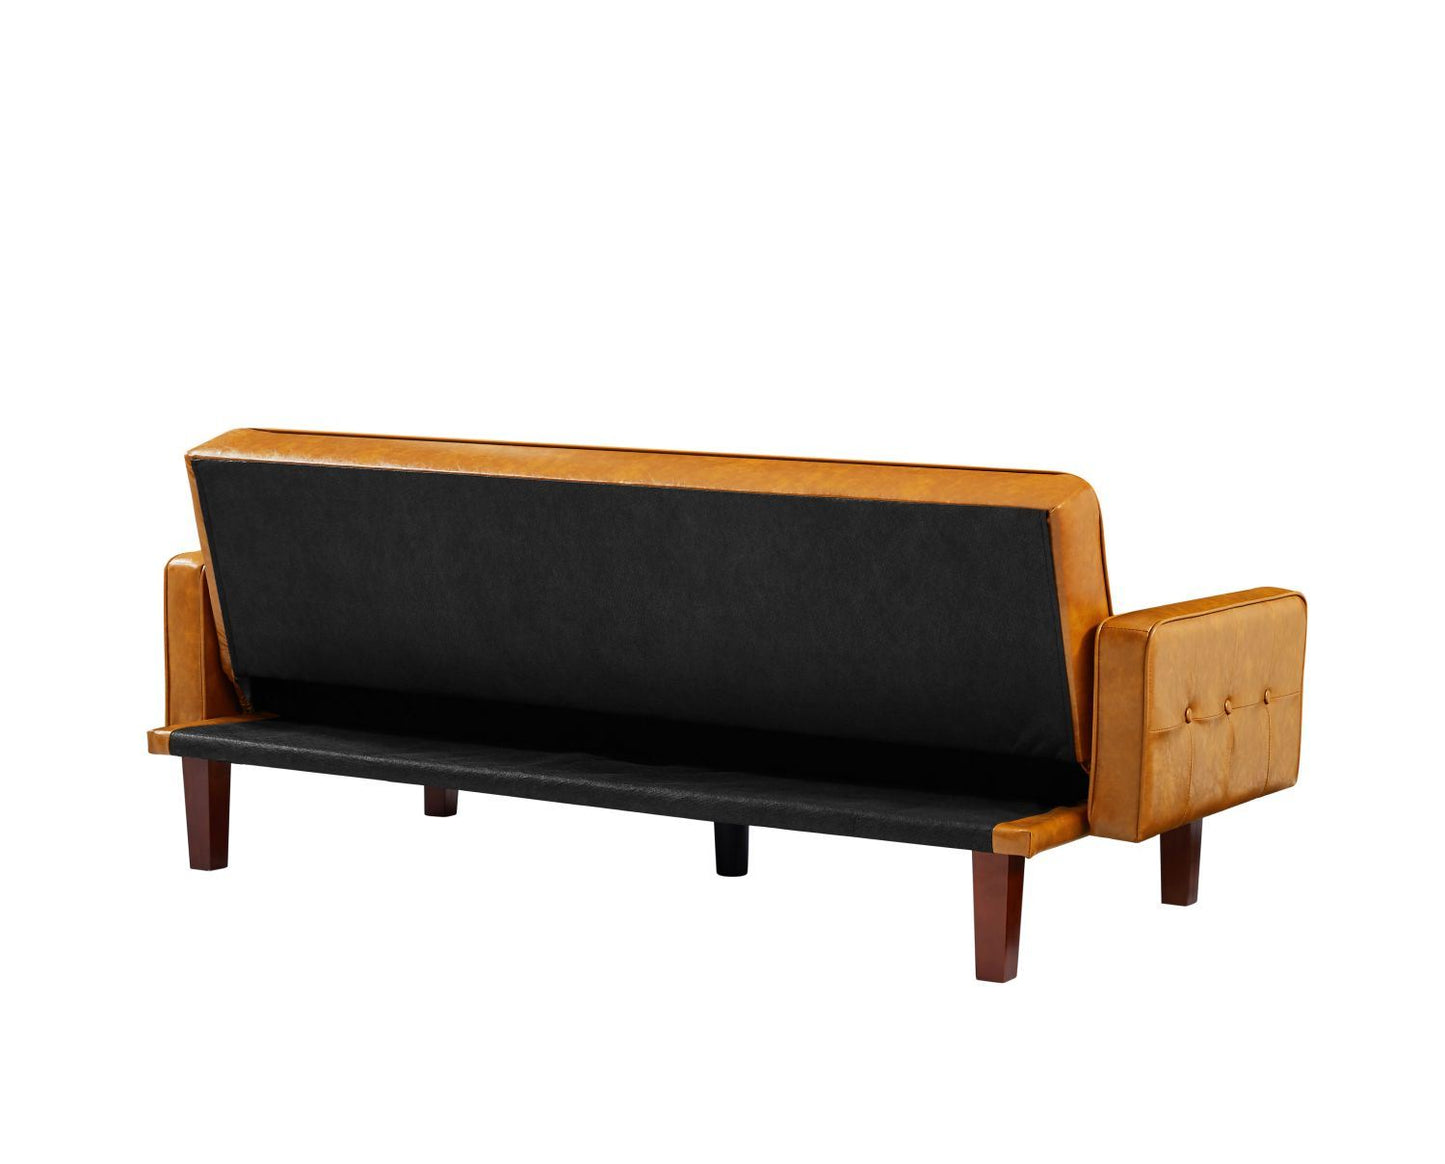 Faux Leather Futon in multiple colors